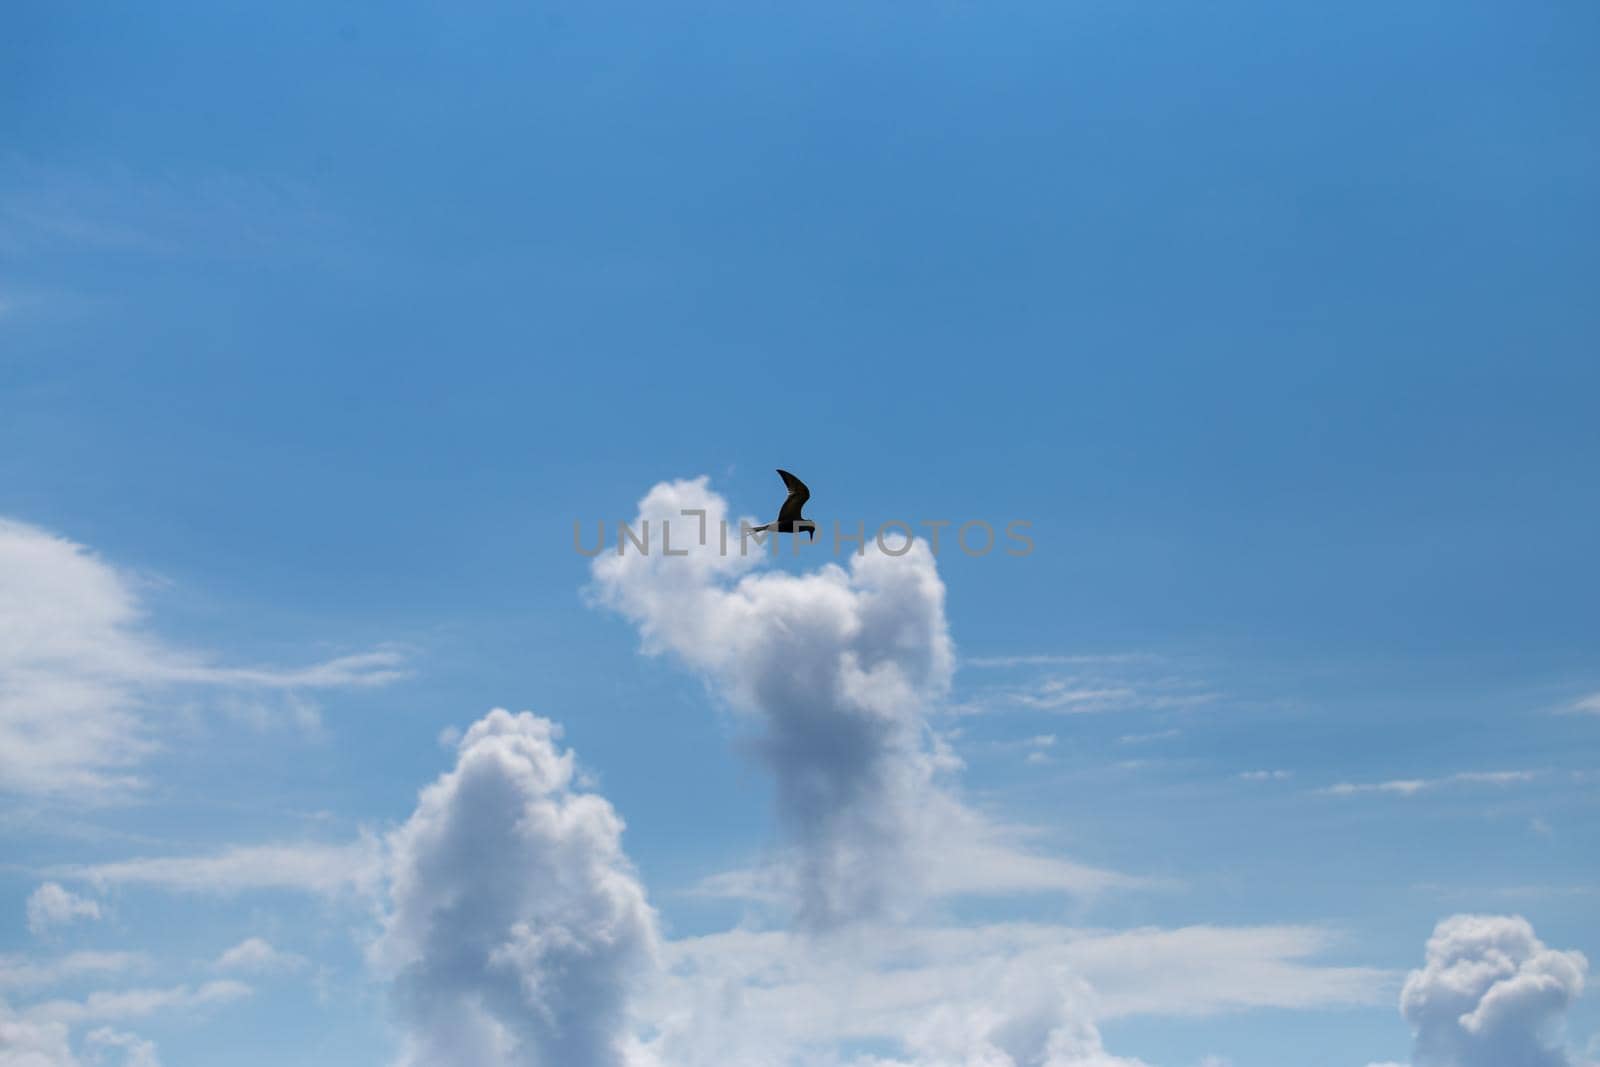 Seabird flying high in the blue summer sky above the vertical clouds, looking down and hunting for fish